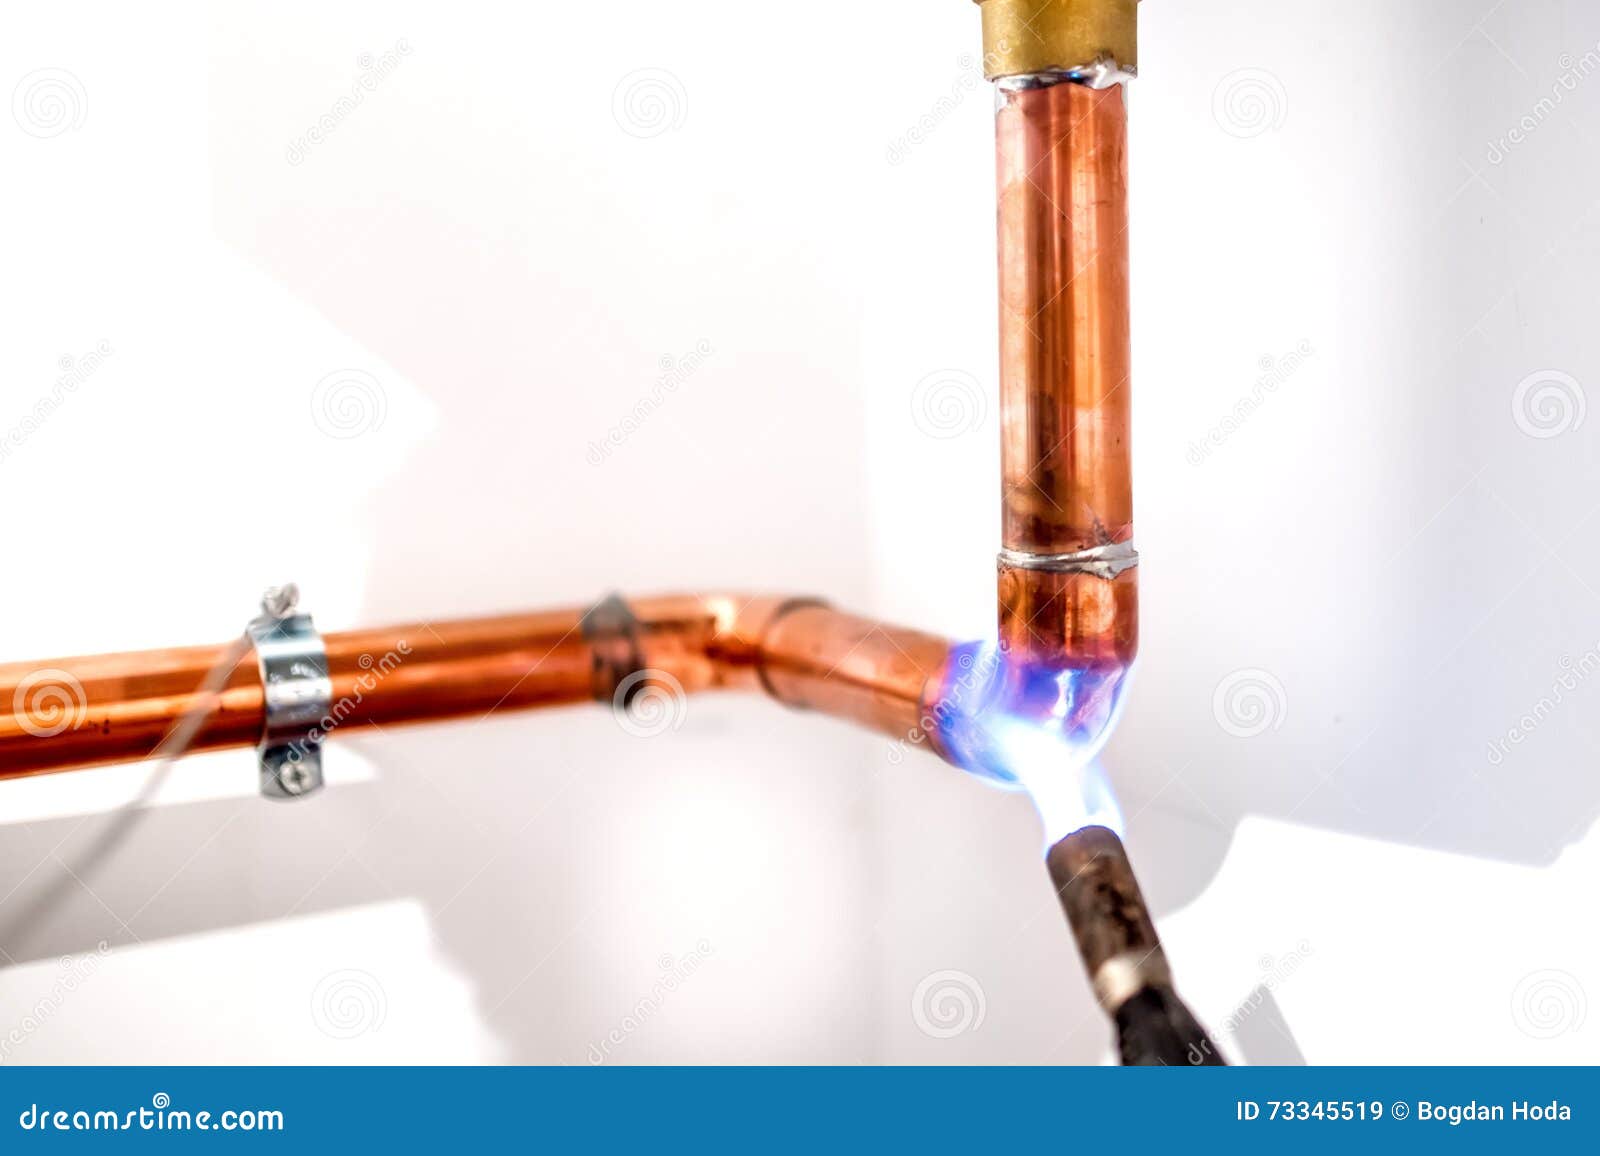 plumber using blowtorch, propane gas torch for welding copper pipes